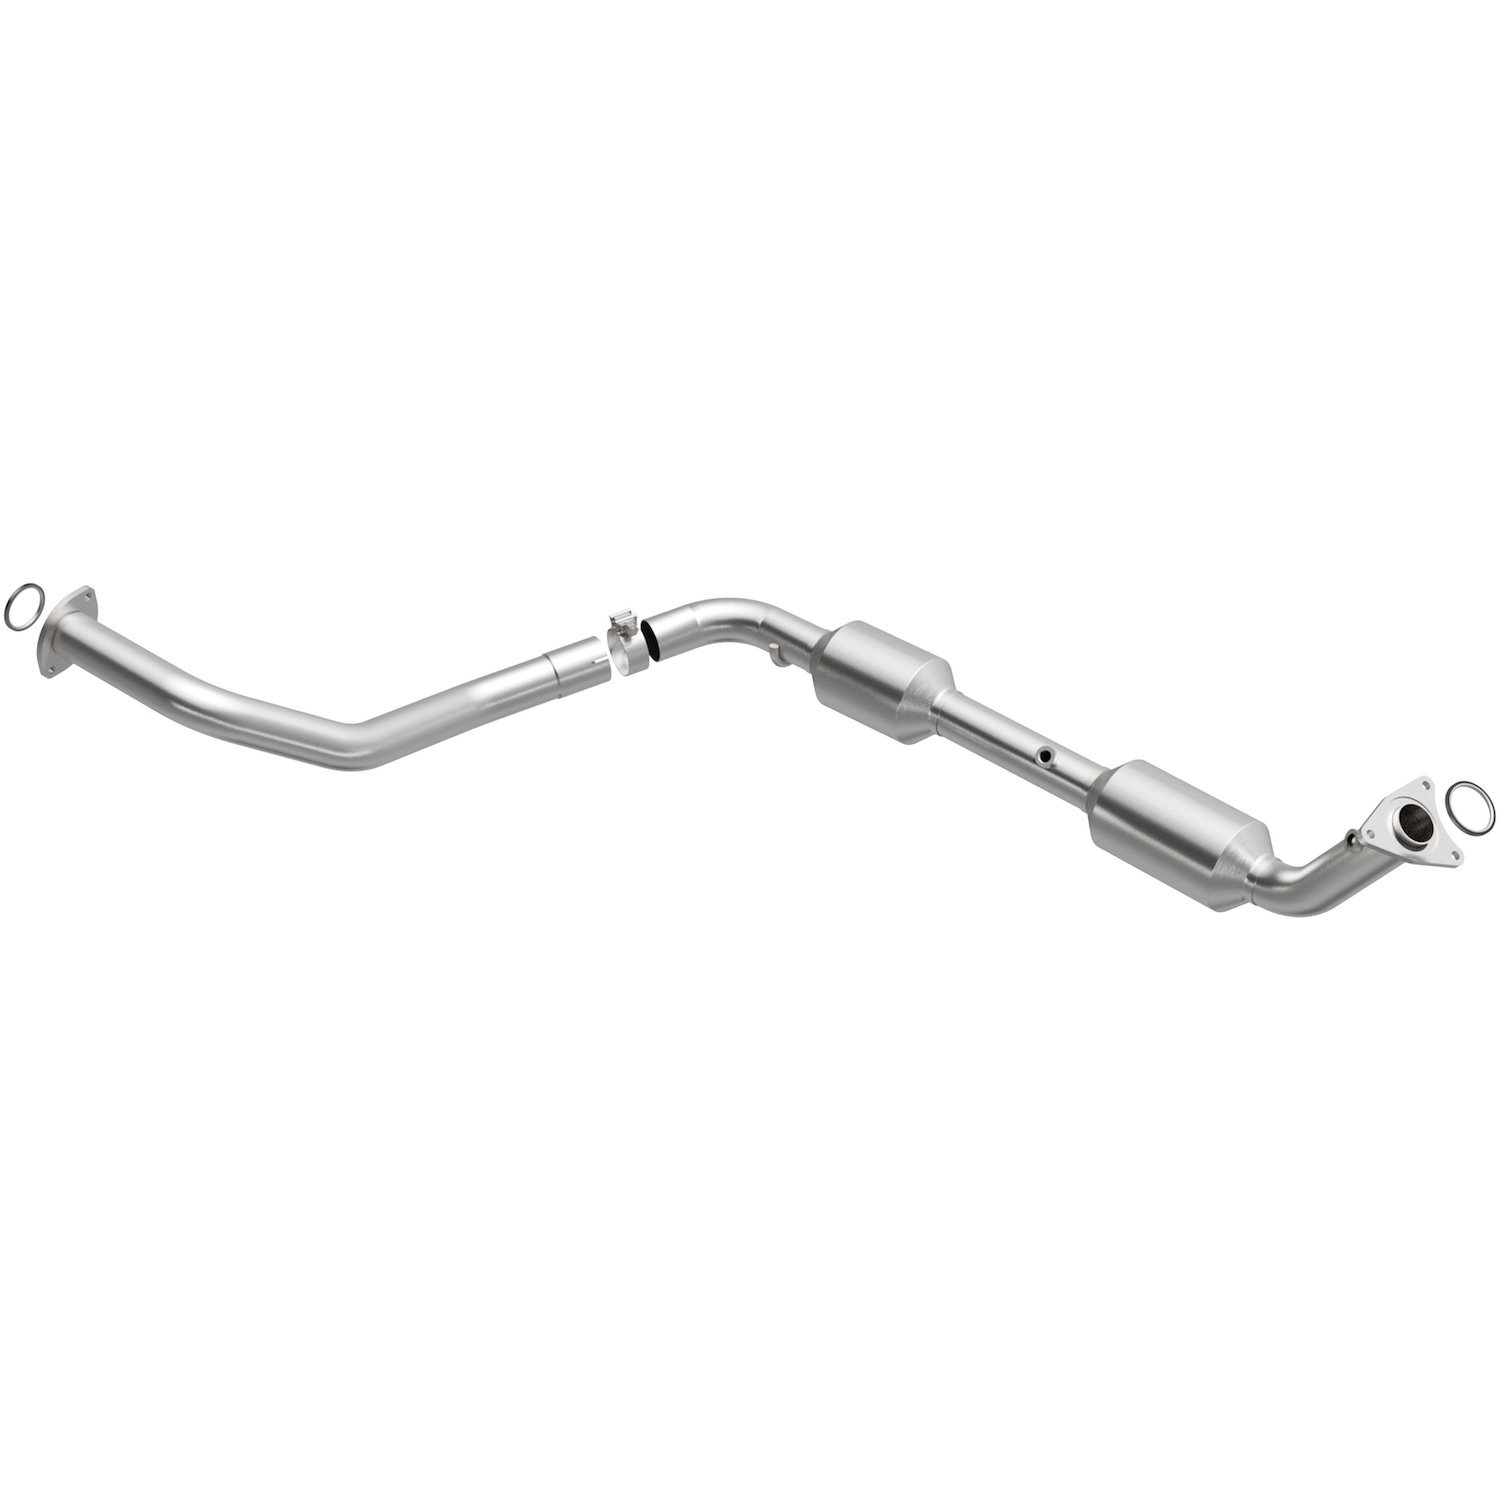 2007-2019 Toyota Tundra California Grade CARB Compliant Direct-Fit Catalytic Converter